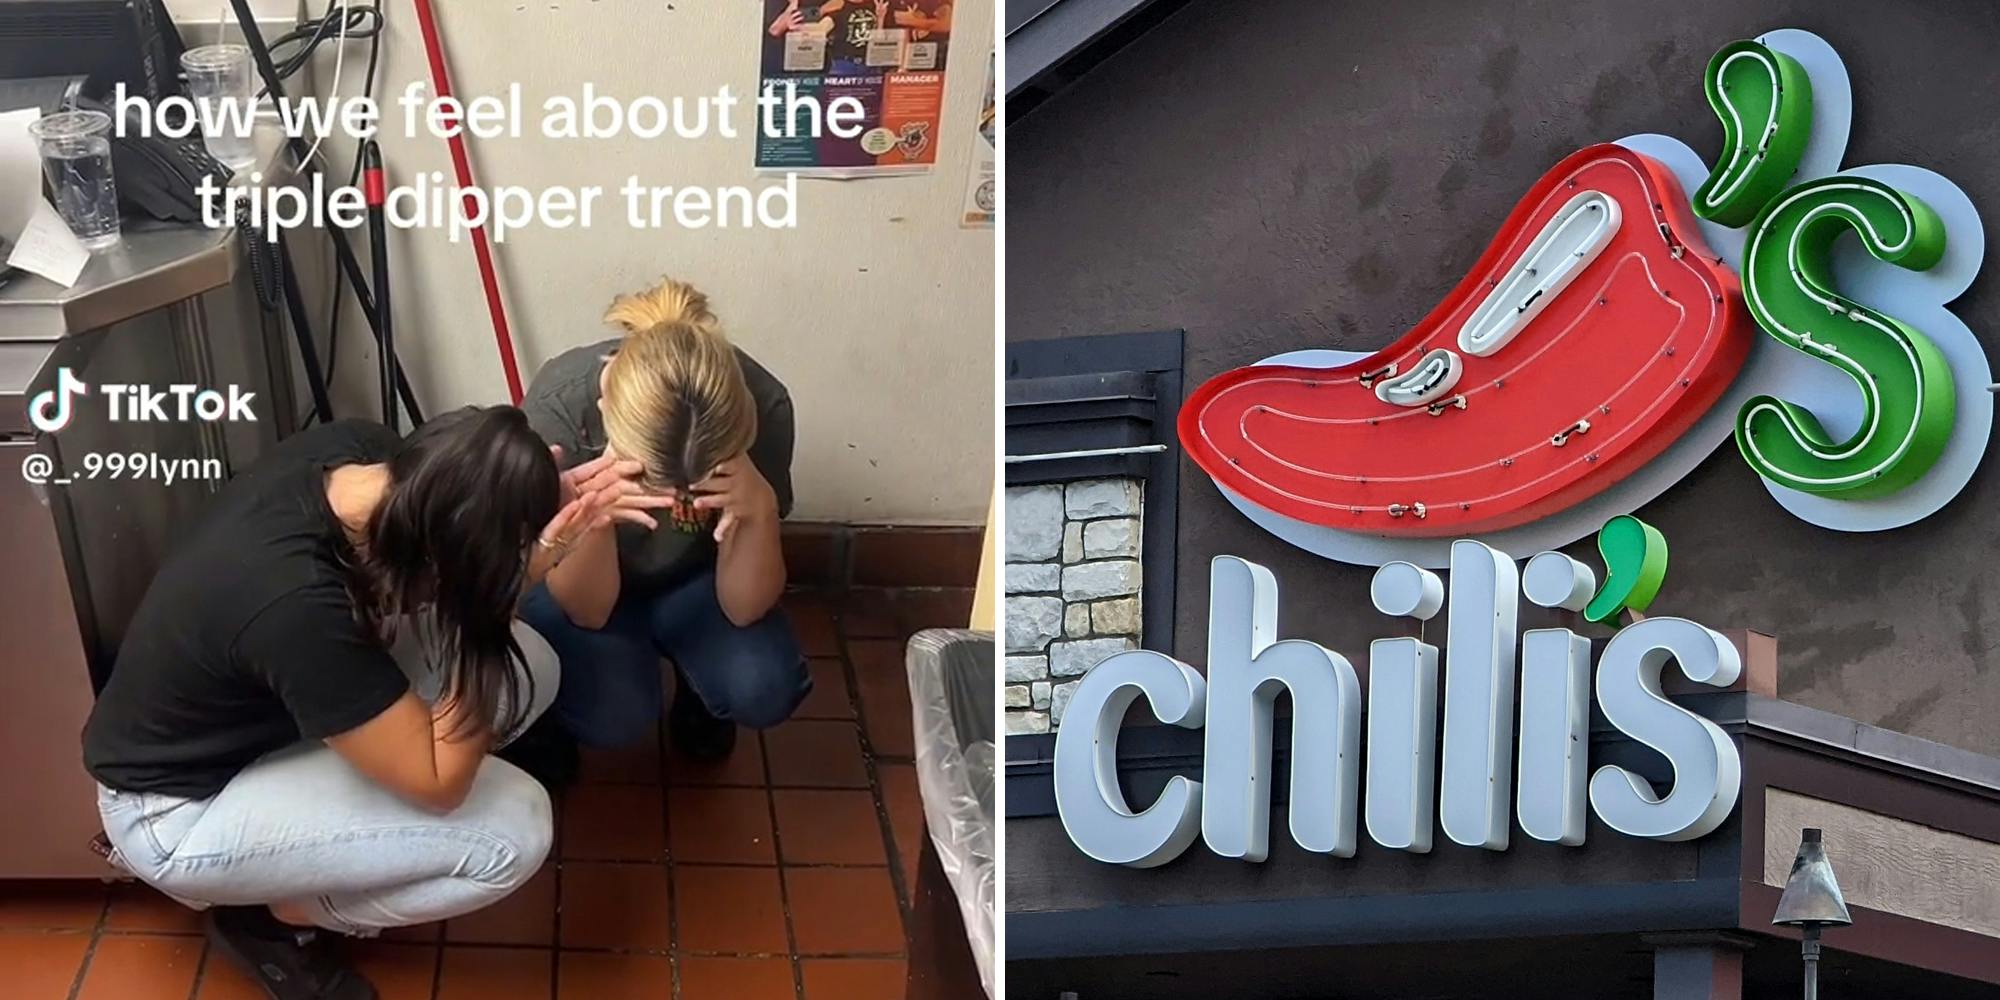 ‘There should not be a line out the door at Chili’s’: Chili’s workers speak out about the ‘triple dipper’ trend